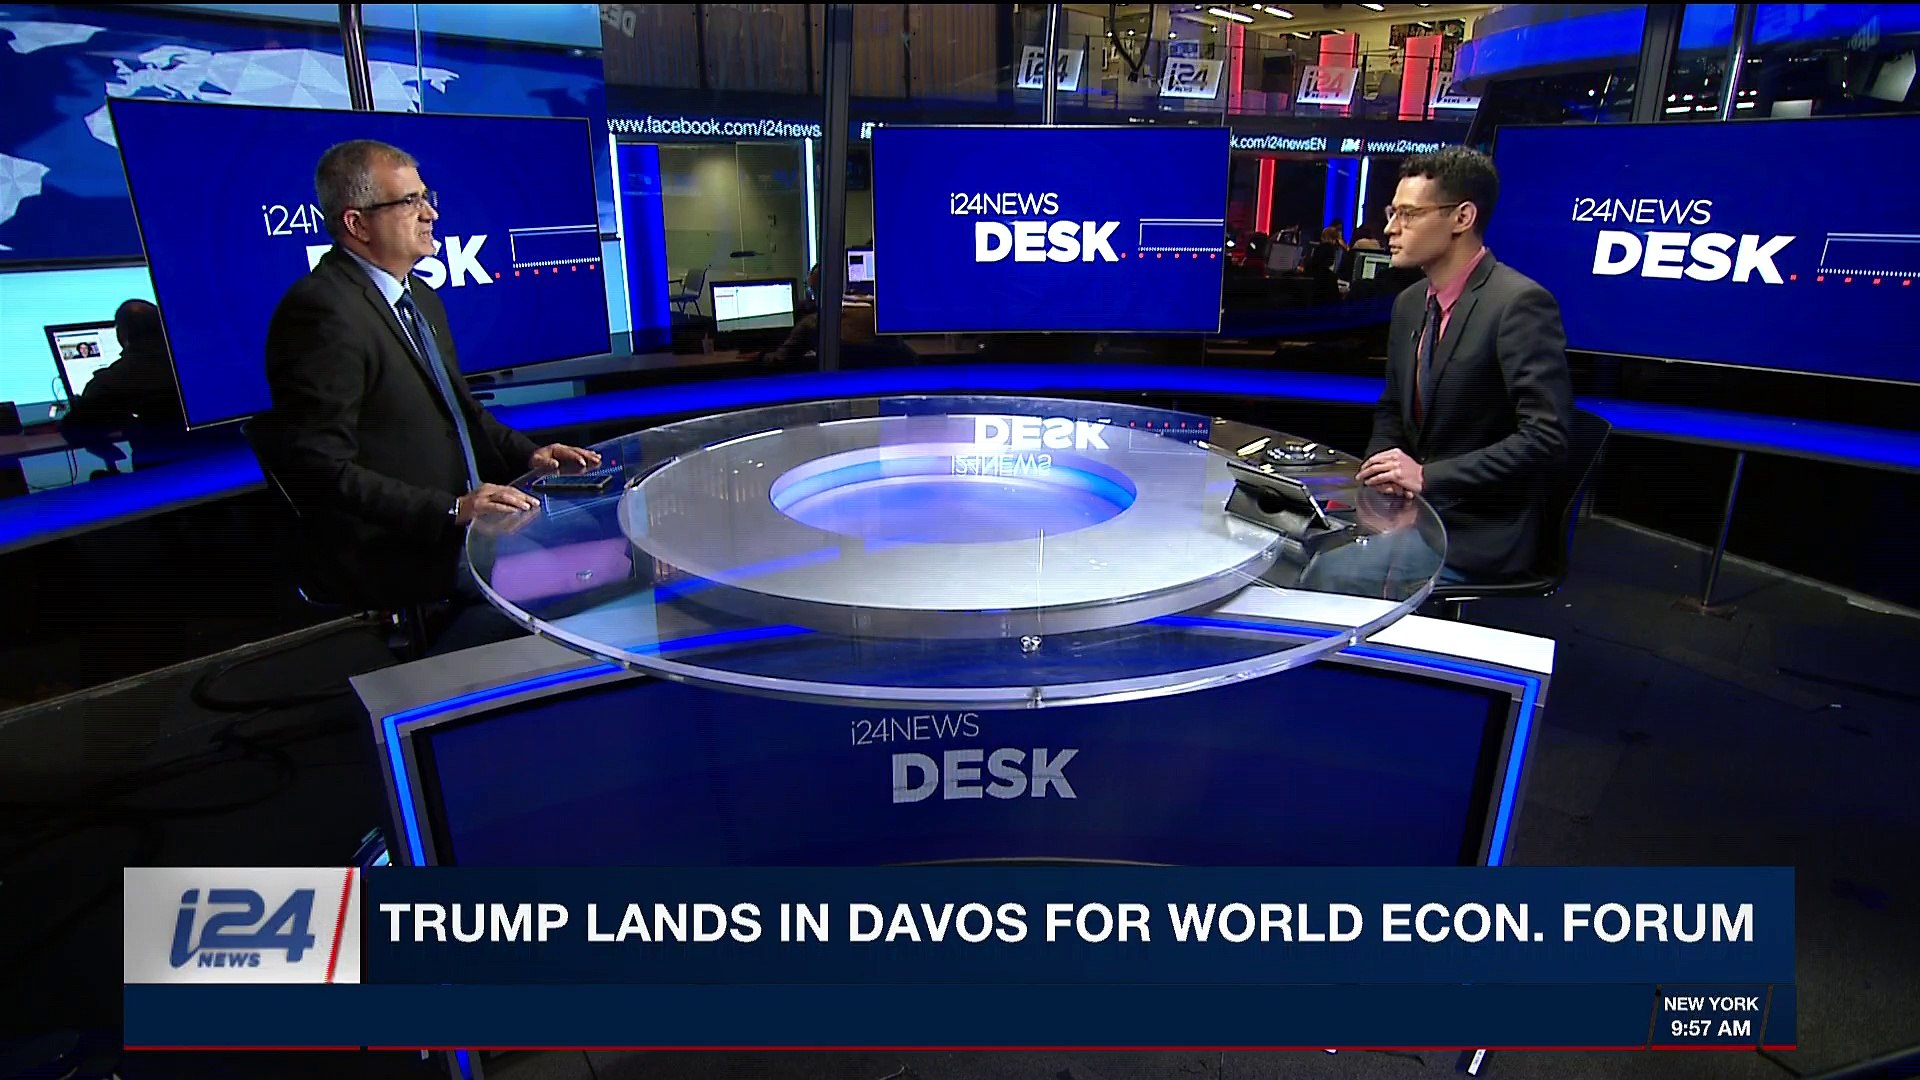 ⁣i24NEWS DESK | Trump lands in Davos for World Econ. Forum | Thursday, January 25th 2018